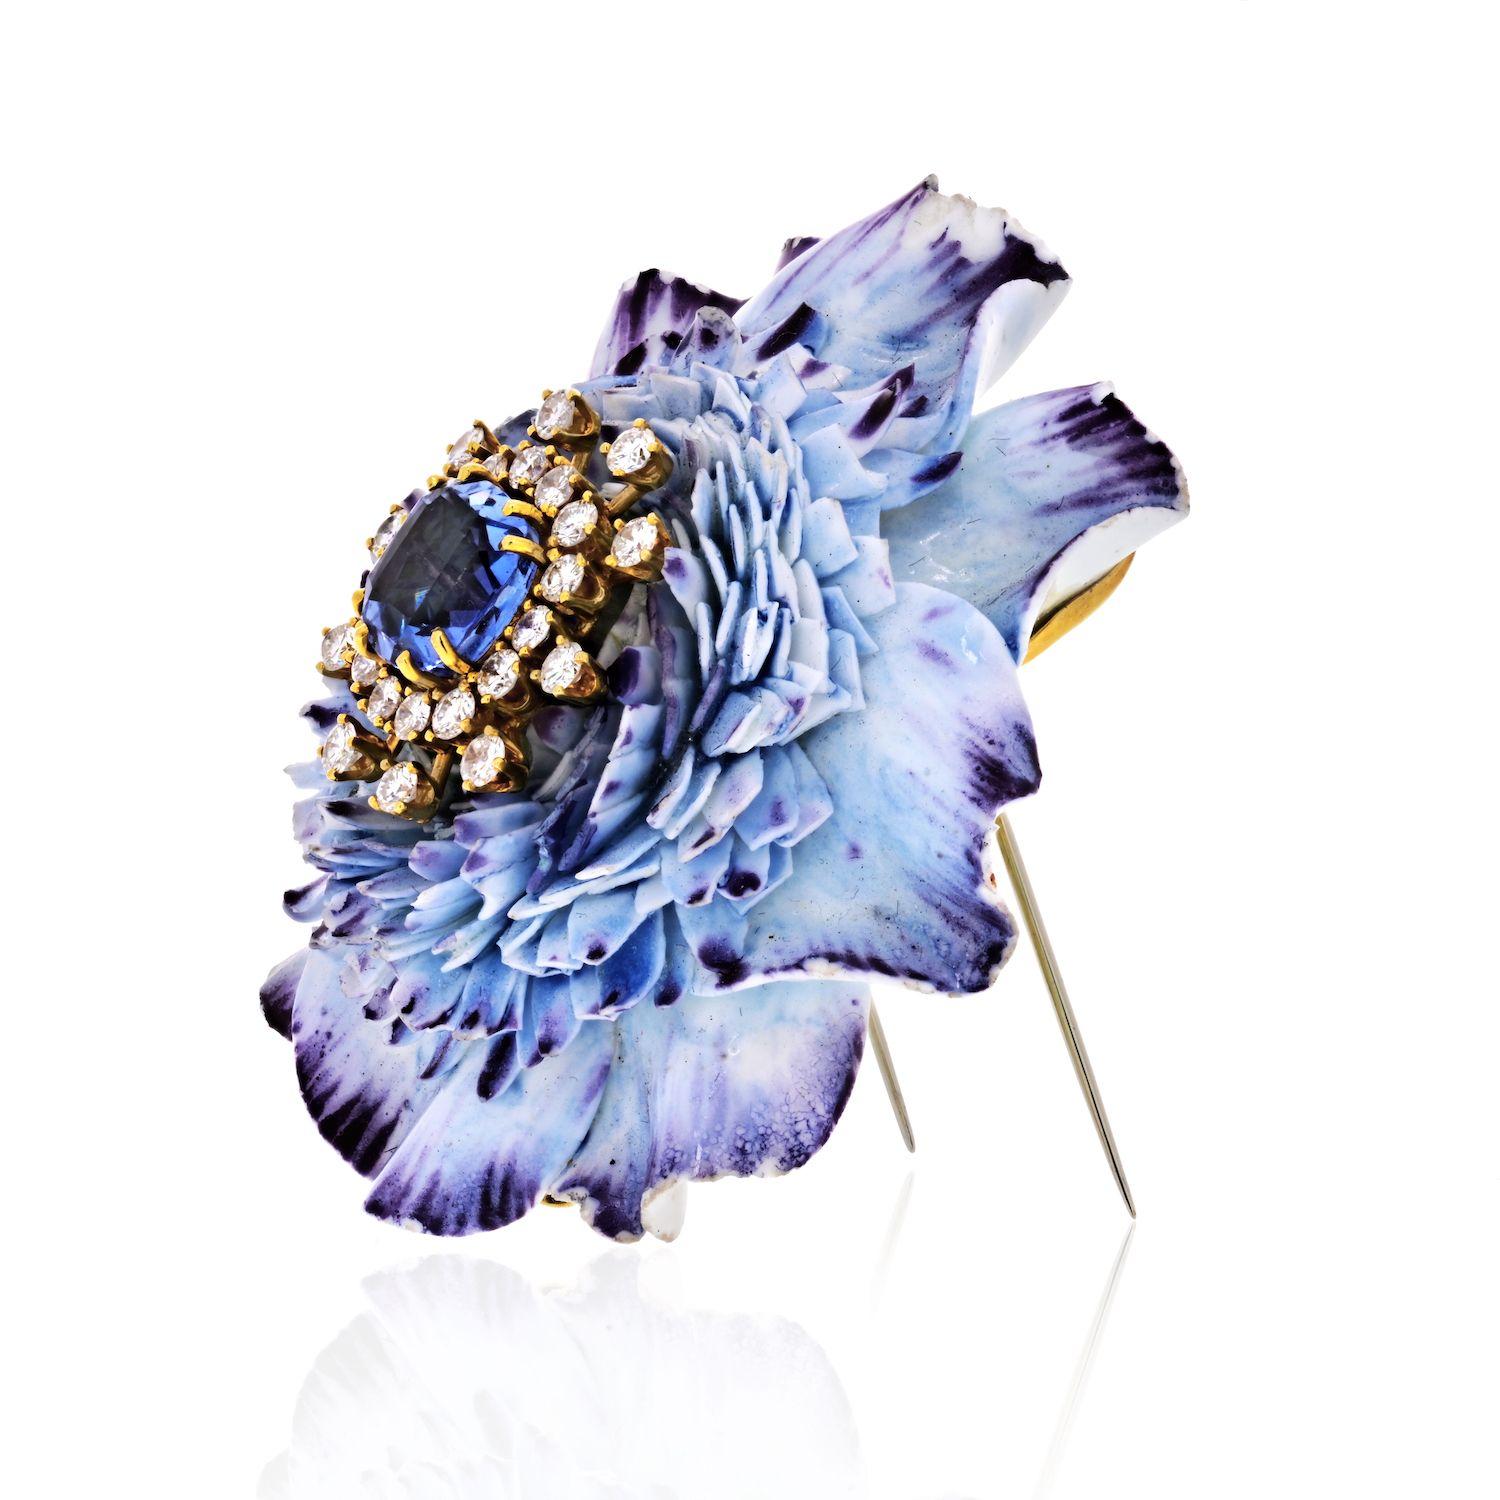 A superbly carved frosted ceramic flower with a cushion-cut sapphire in the center.  The flowerhead is embellished with diamonds and offers a beautiful glitter like effect to center sapphire. 
This brooch has a soft blue hue producing an adequate